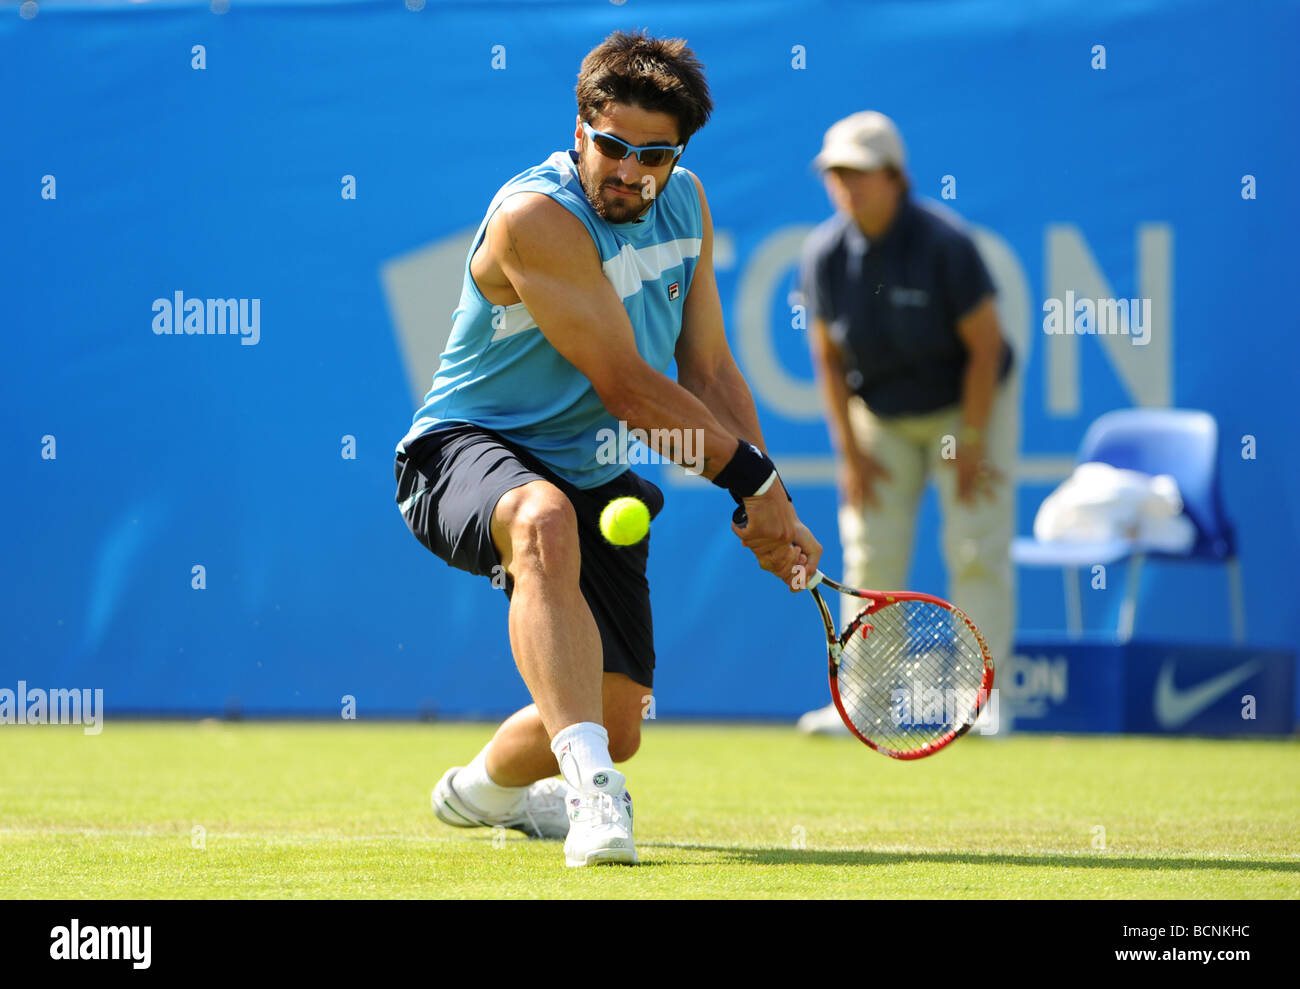 Janko Tipsarevic in action from the Aegon International 2009 at Devonshire park, Eastbourne Stock Photo